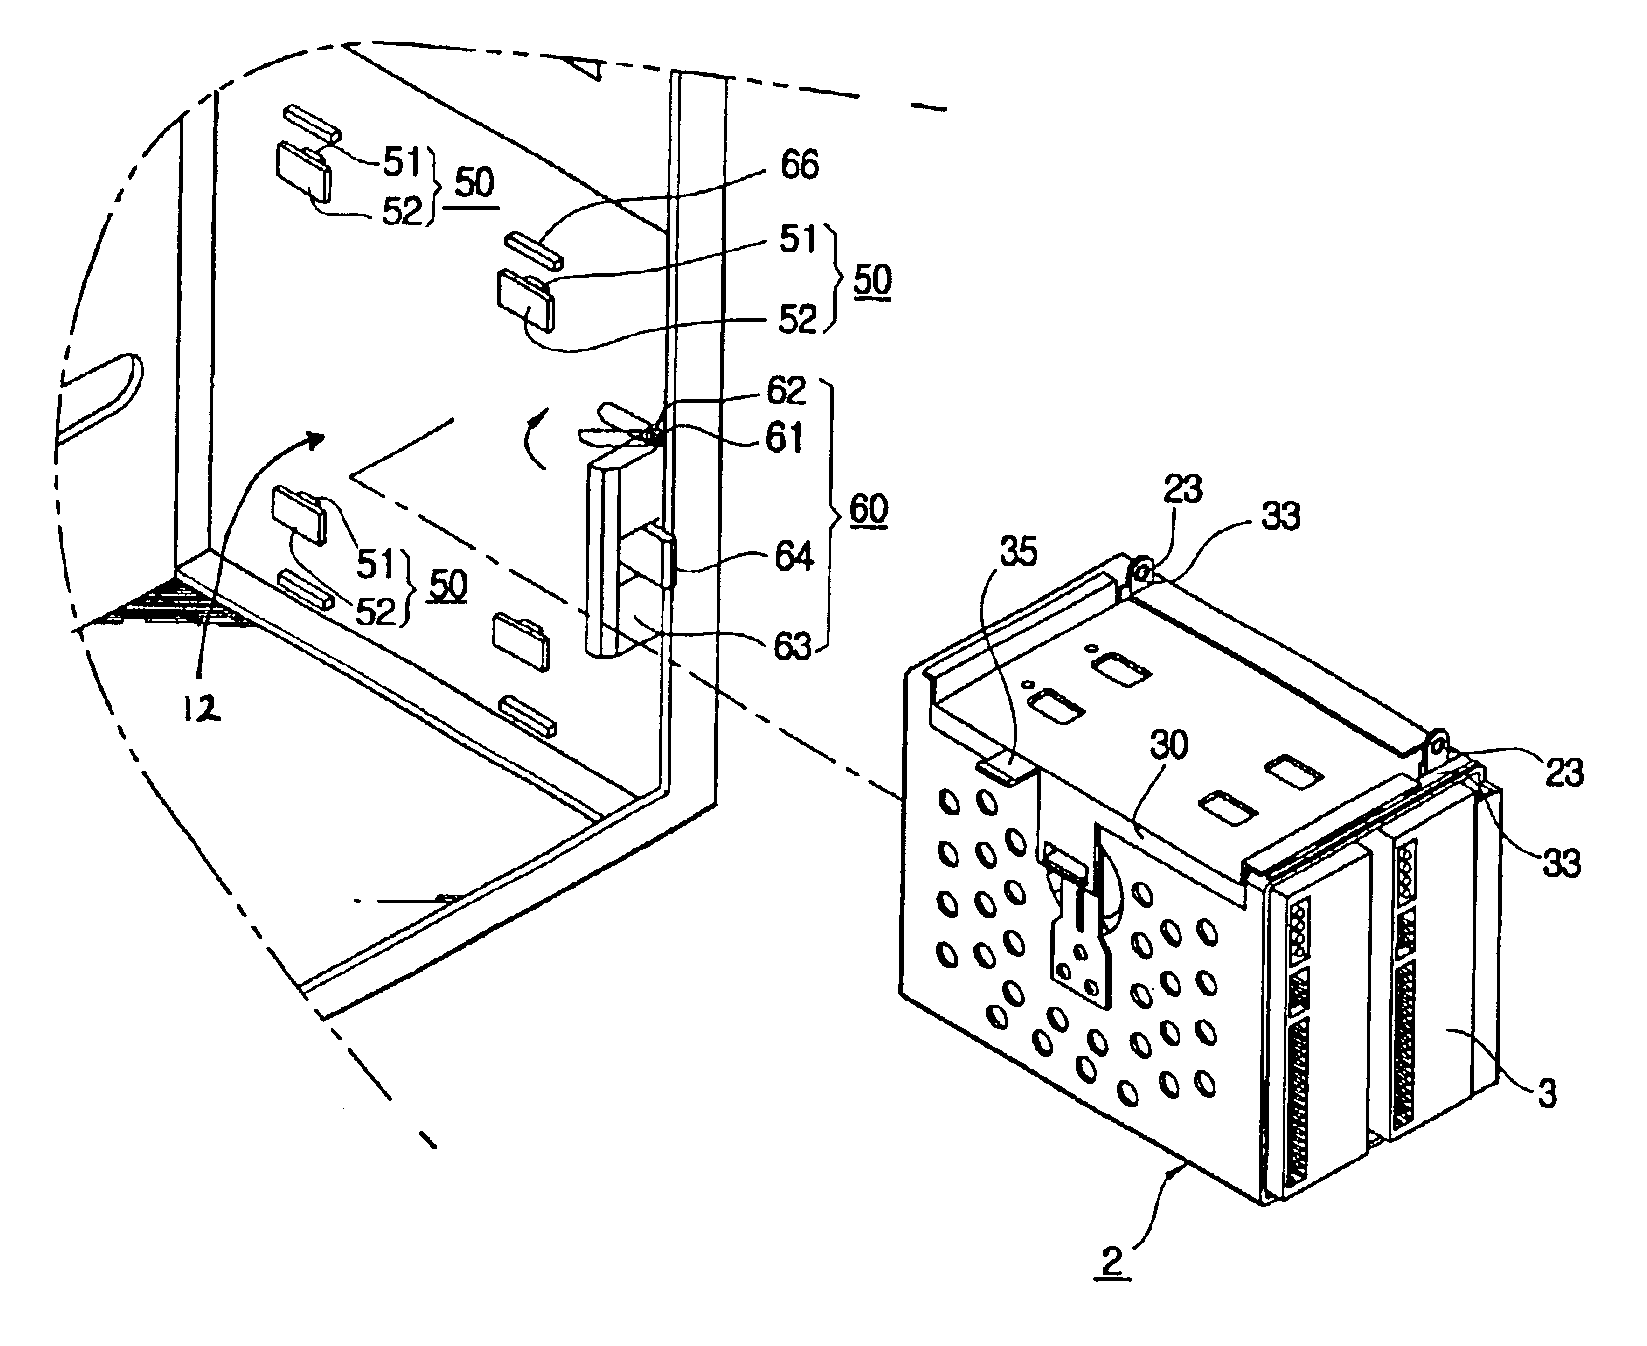 Computer cabinet with mounted hard disk casing and hard disks